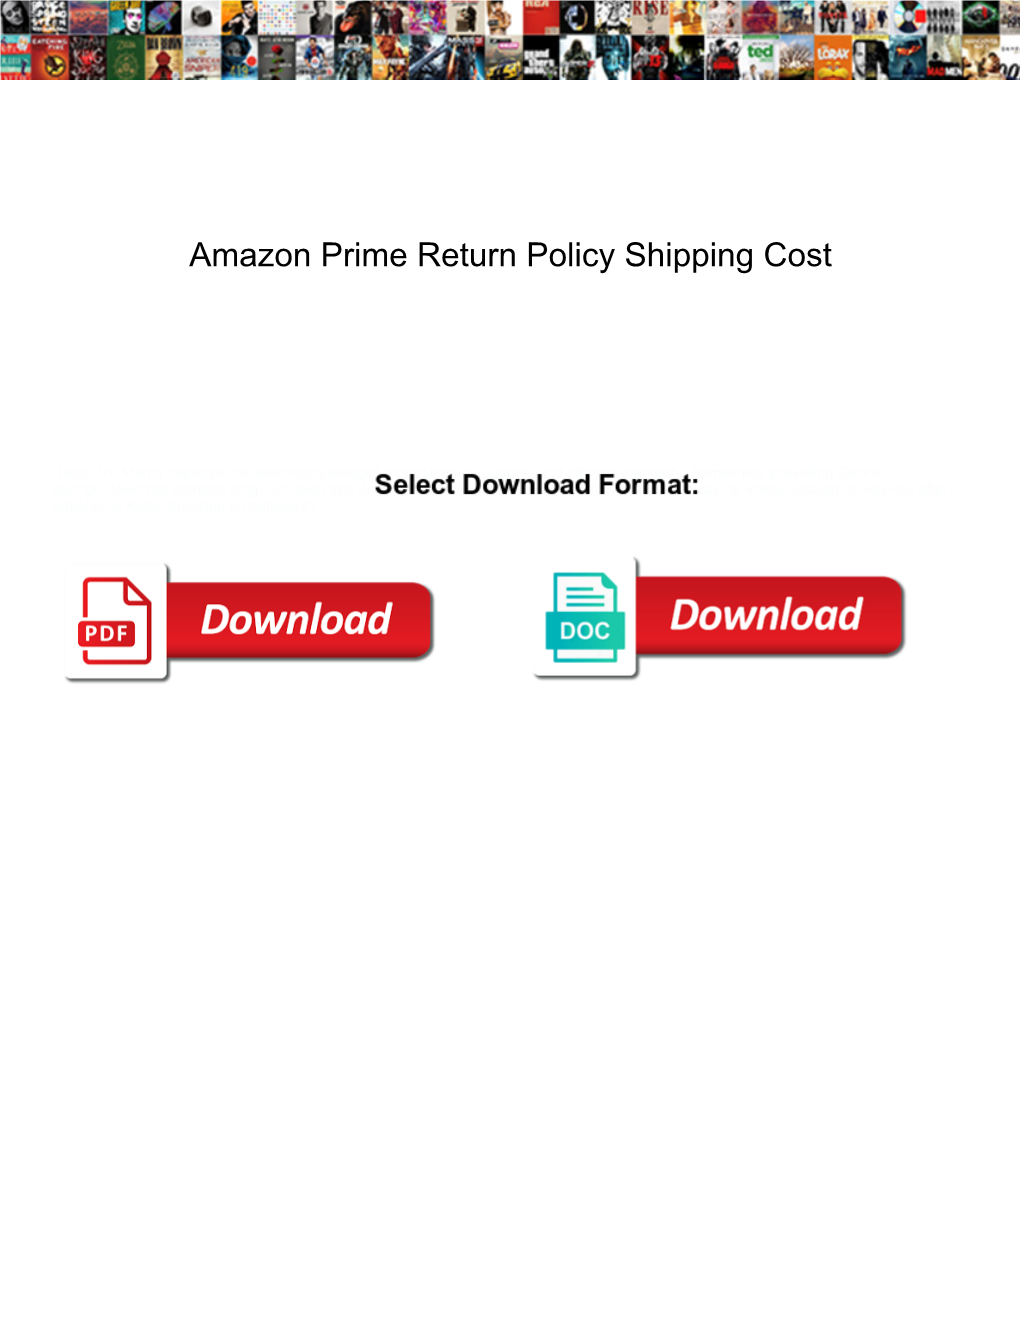 Amazon Prime Return Policy Shipping Cost